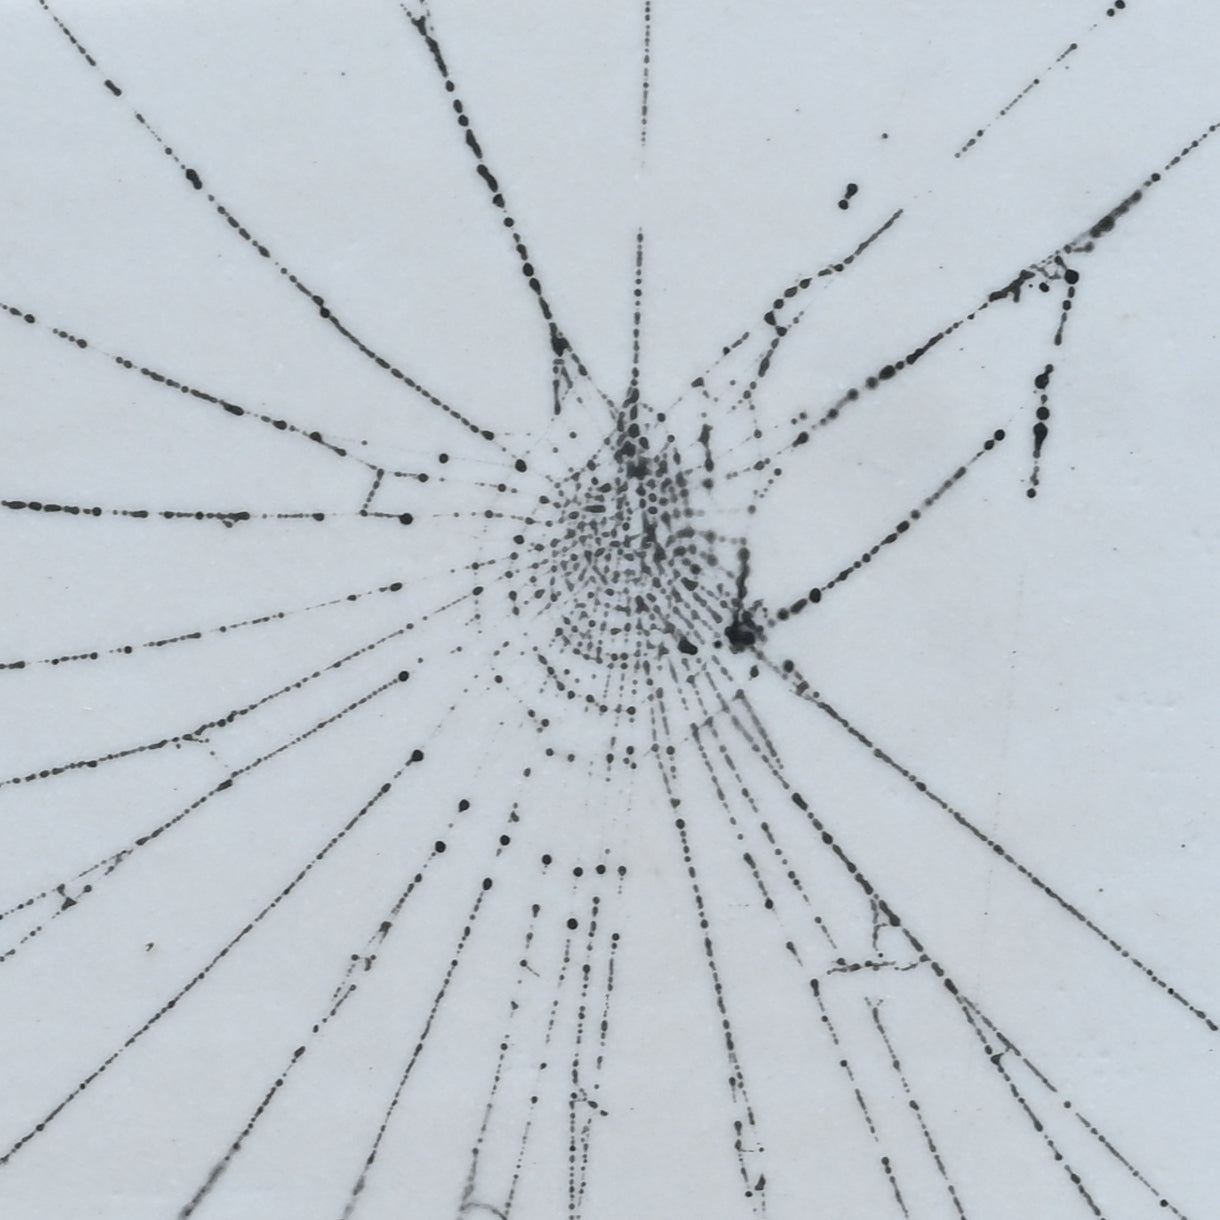 Web on Clay (151), Collected August 31, 2022